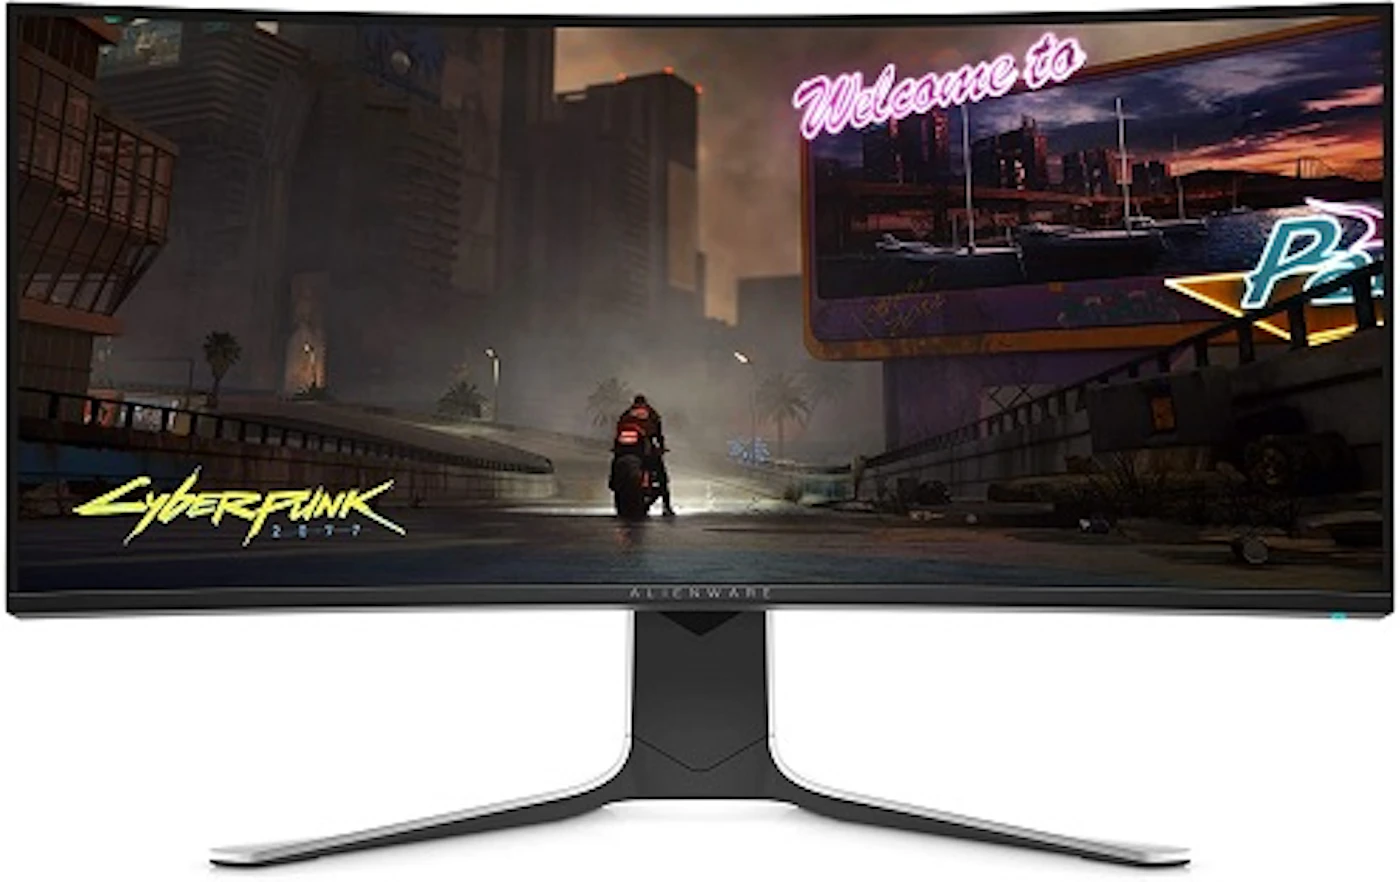 Alienware 34 3440 x 1440 UltraWide Curved Gaming Monitor AW3420DW - MX